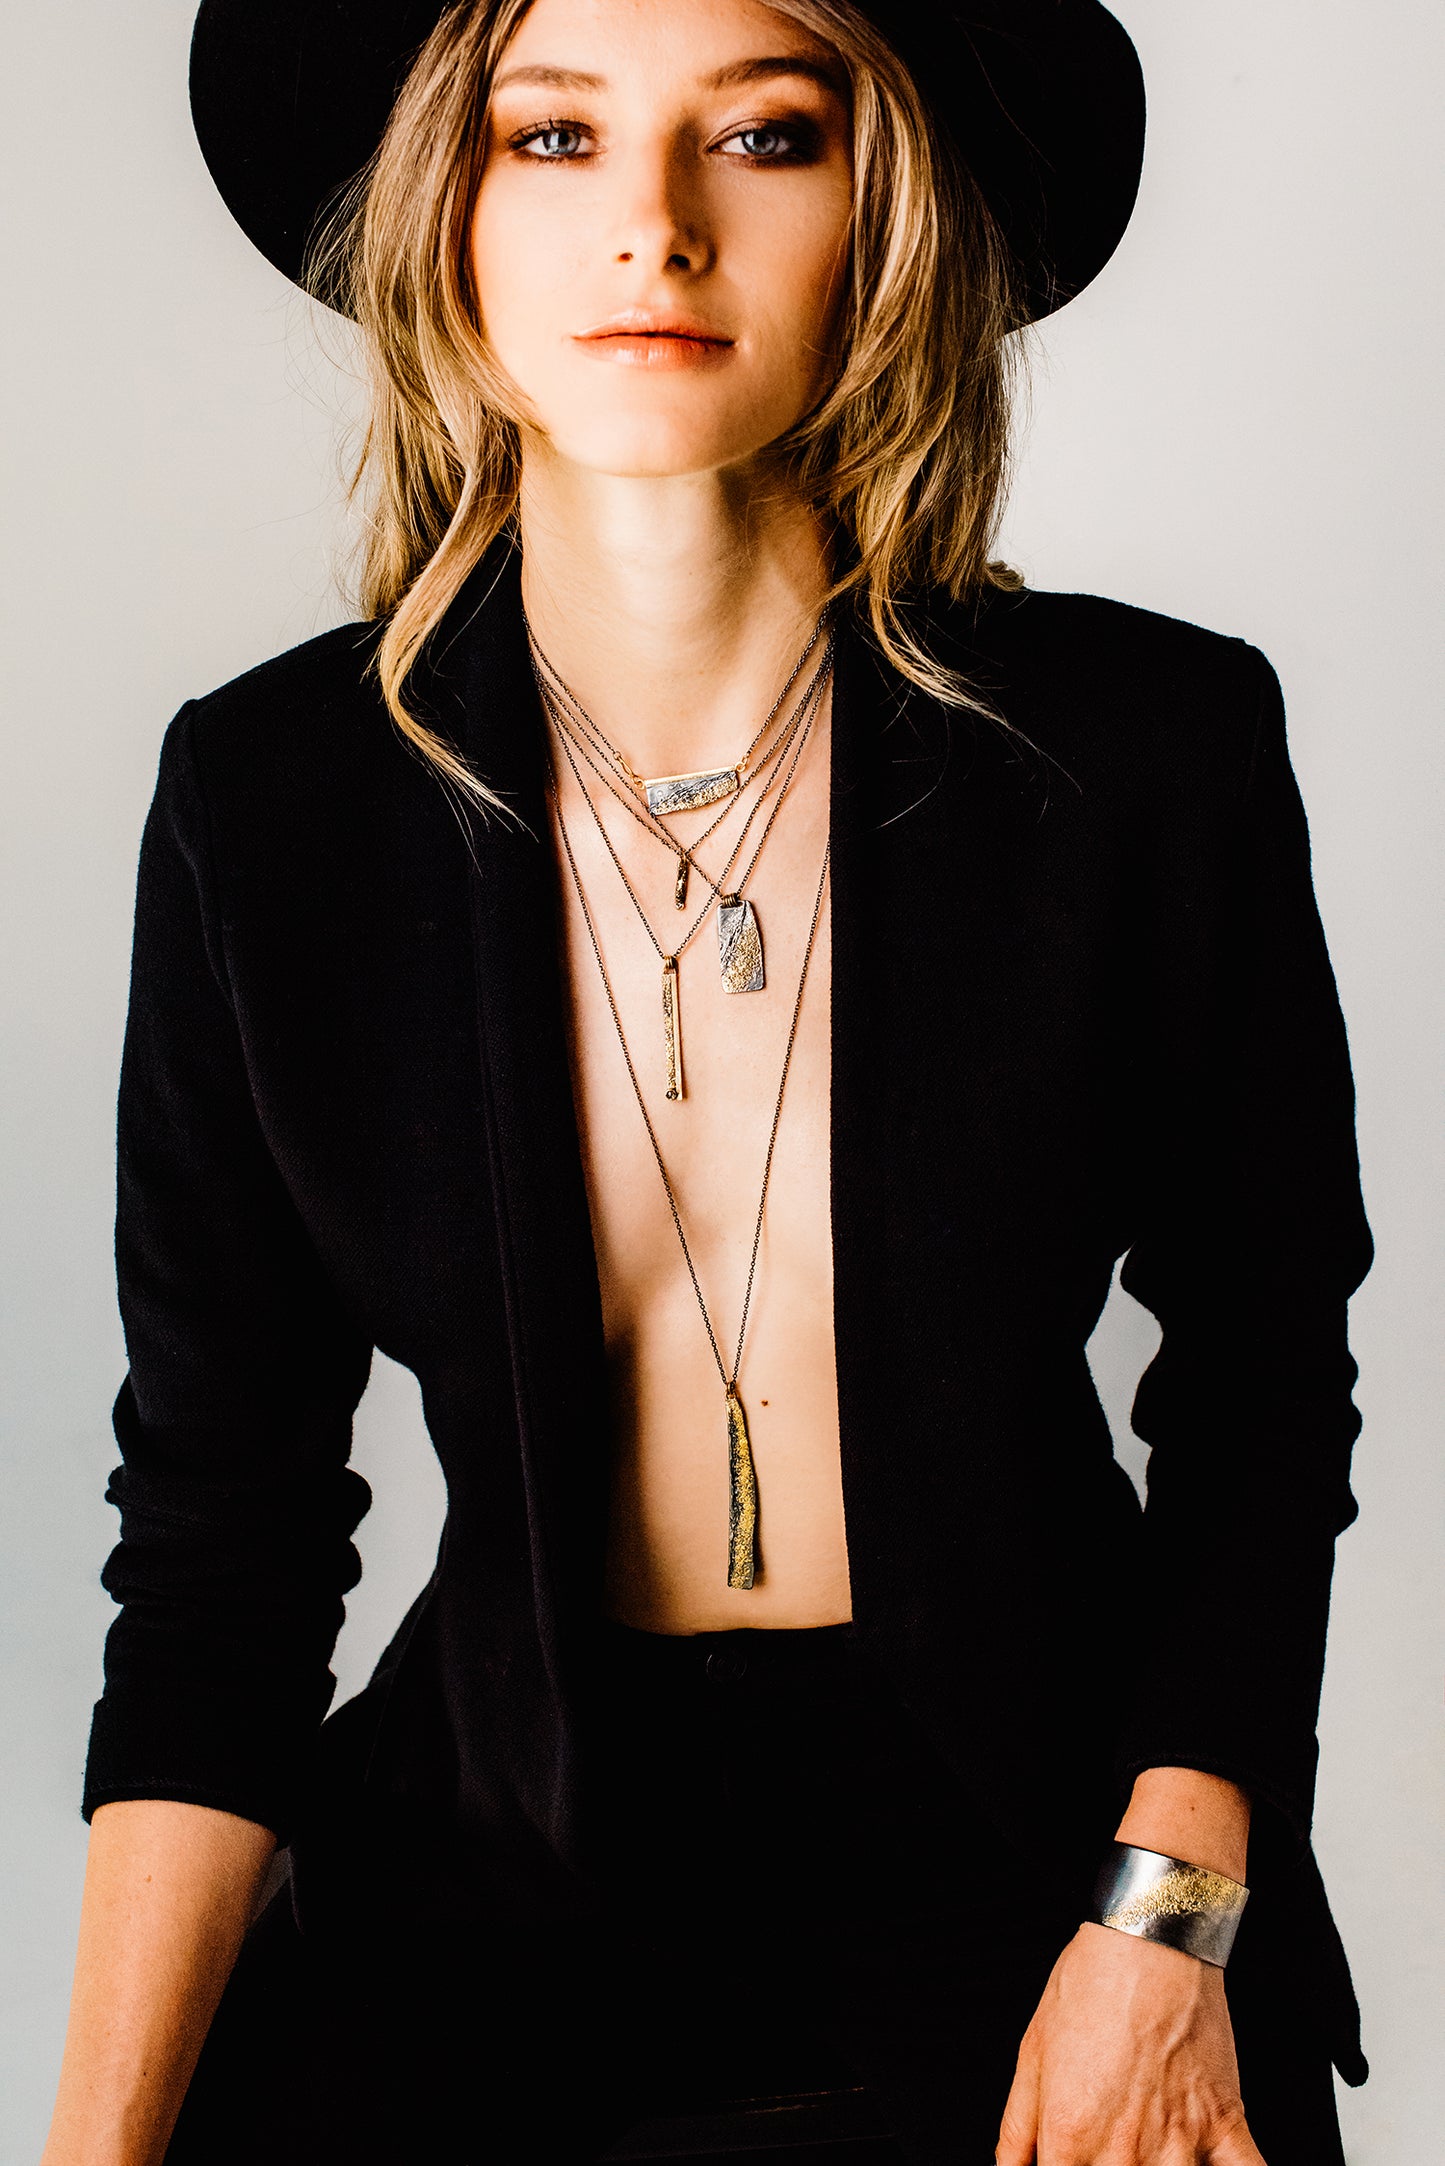 Five for Friday: Sustainable Metalsmith and Jewelry Designer Kate Maller